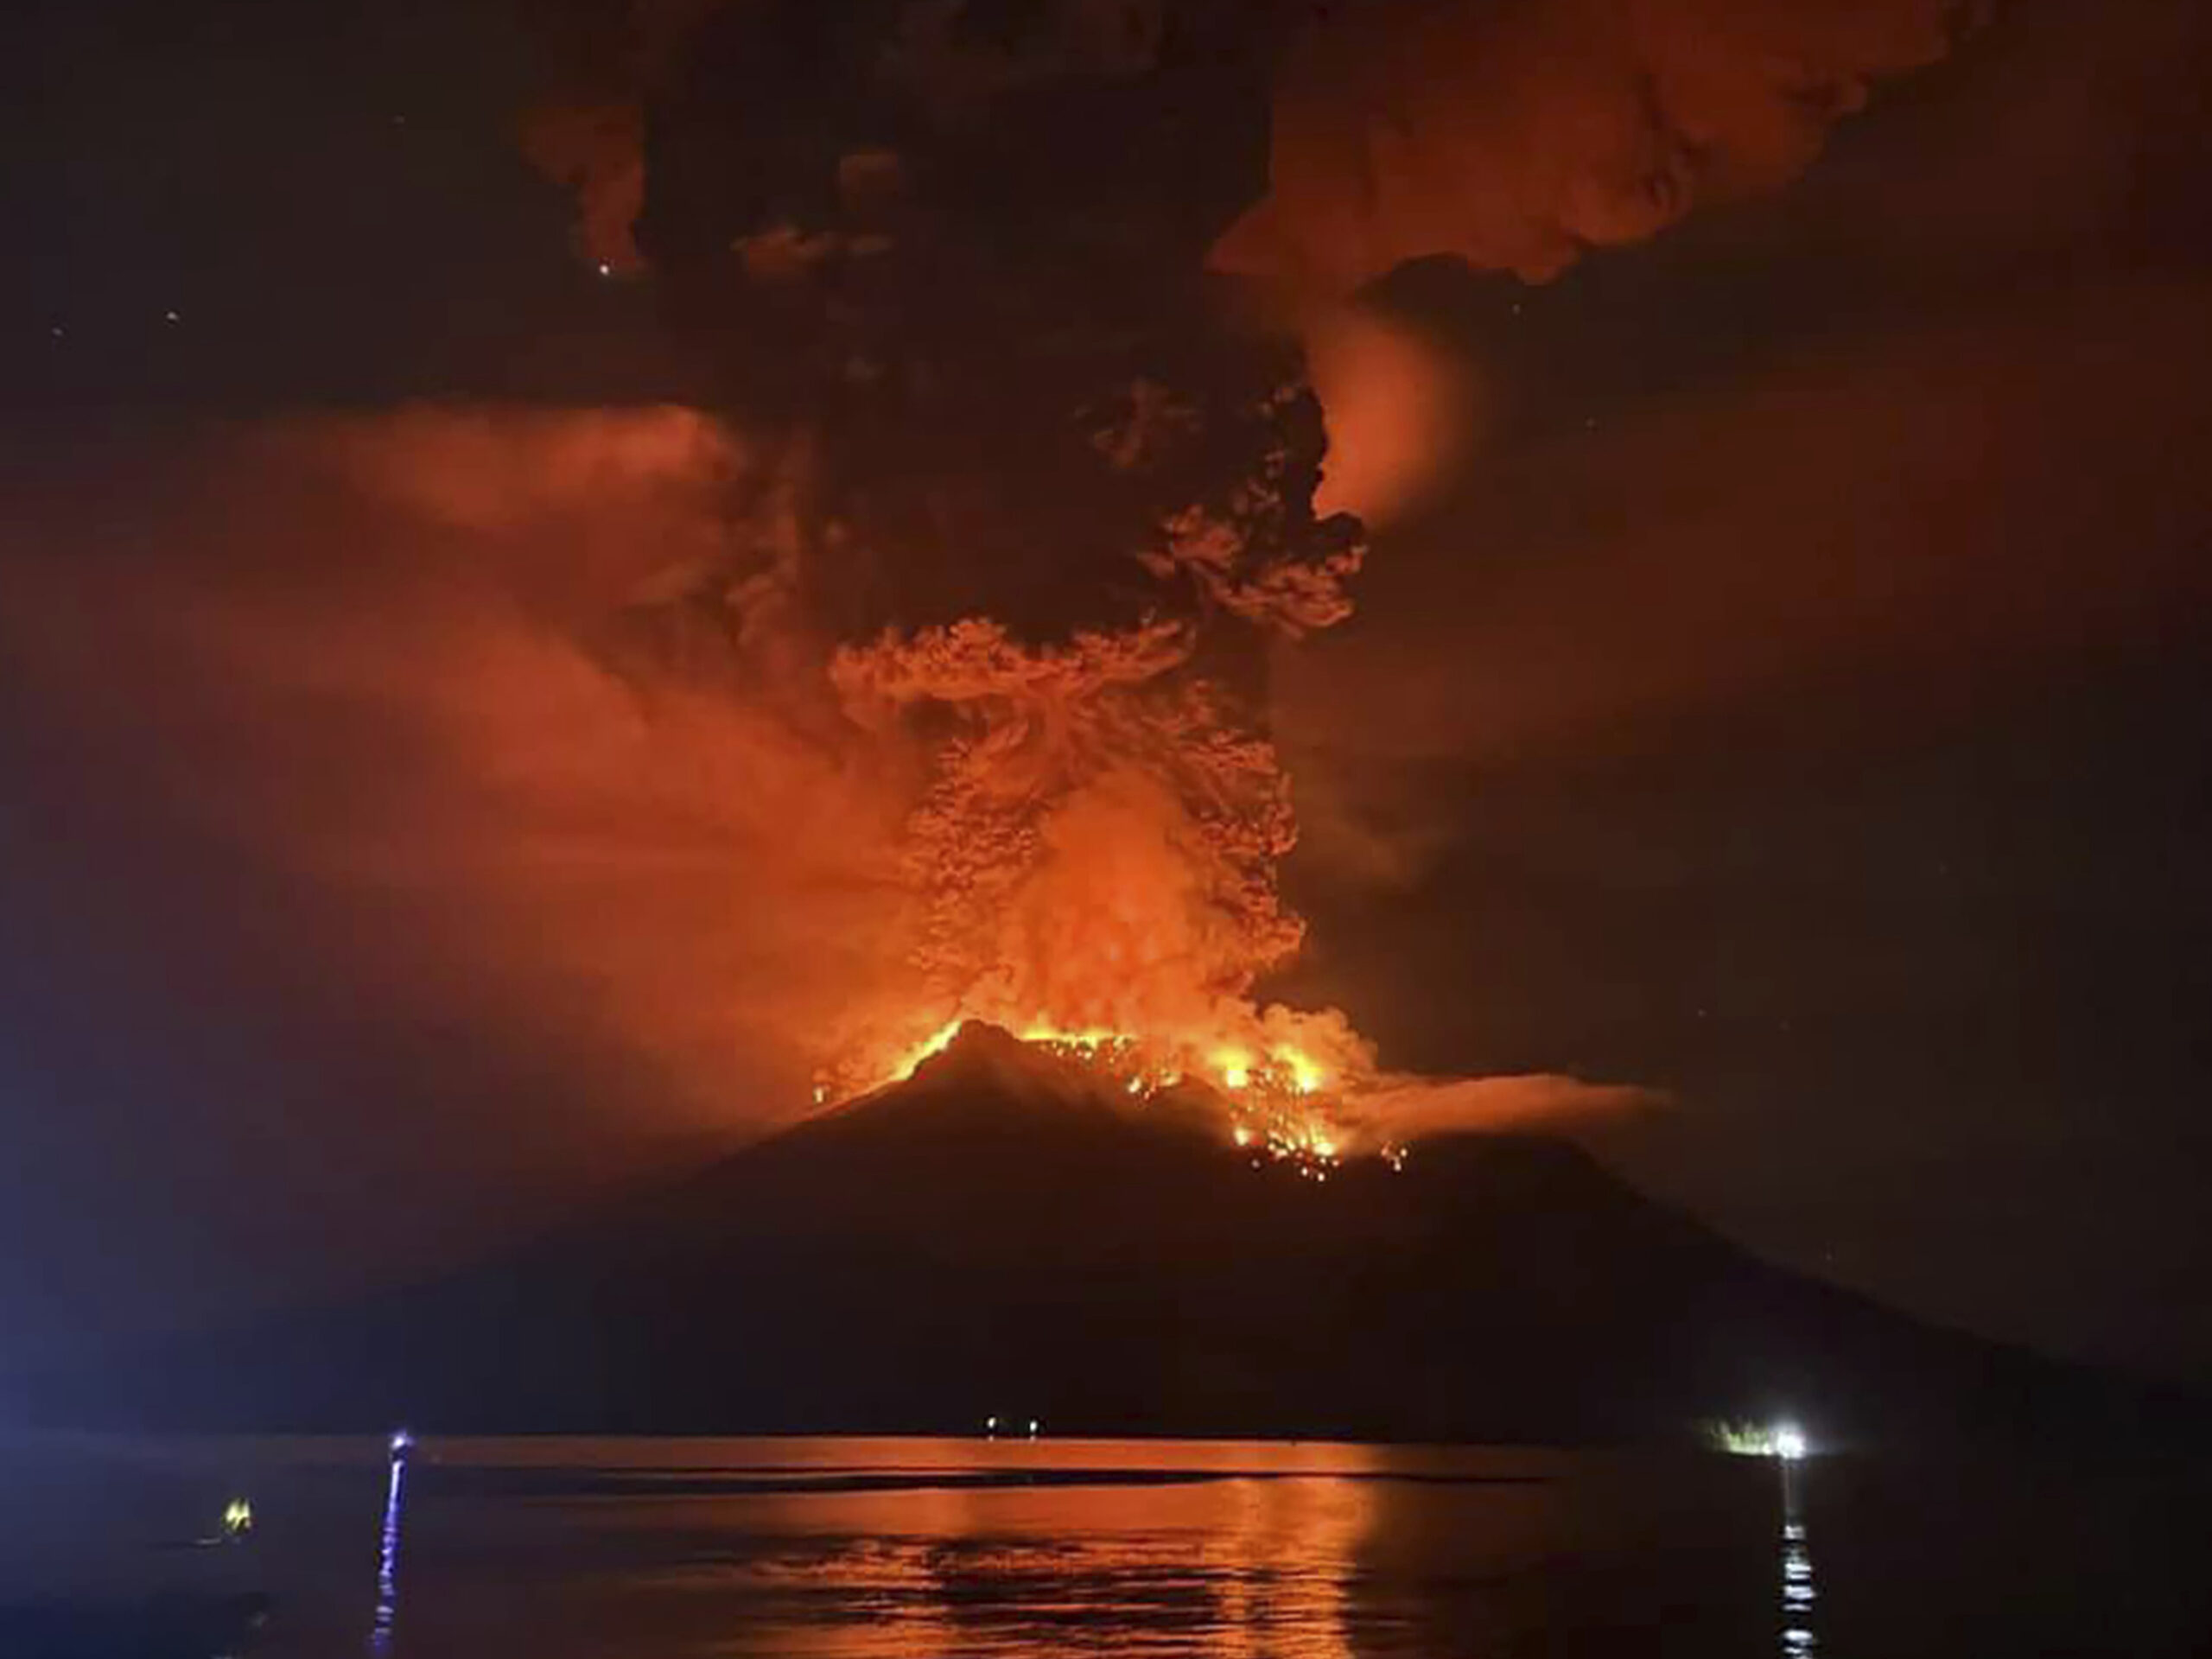 Indonesians leave homes near erupting volcano and airport closes due to ash danger